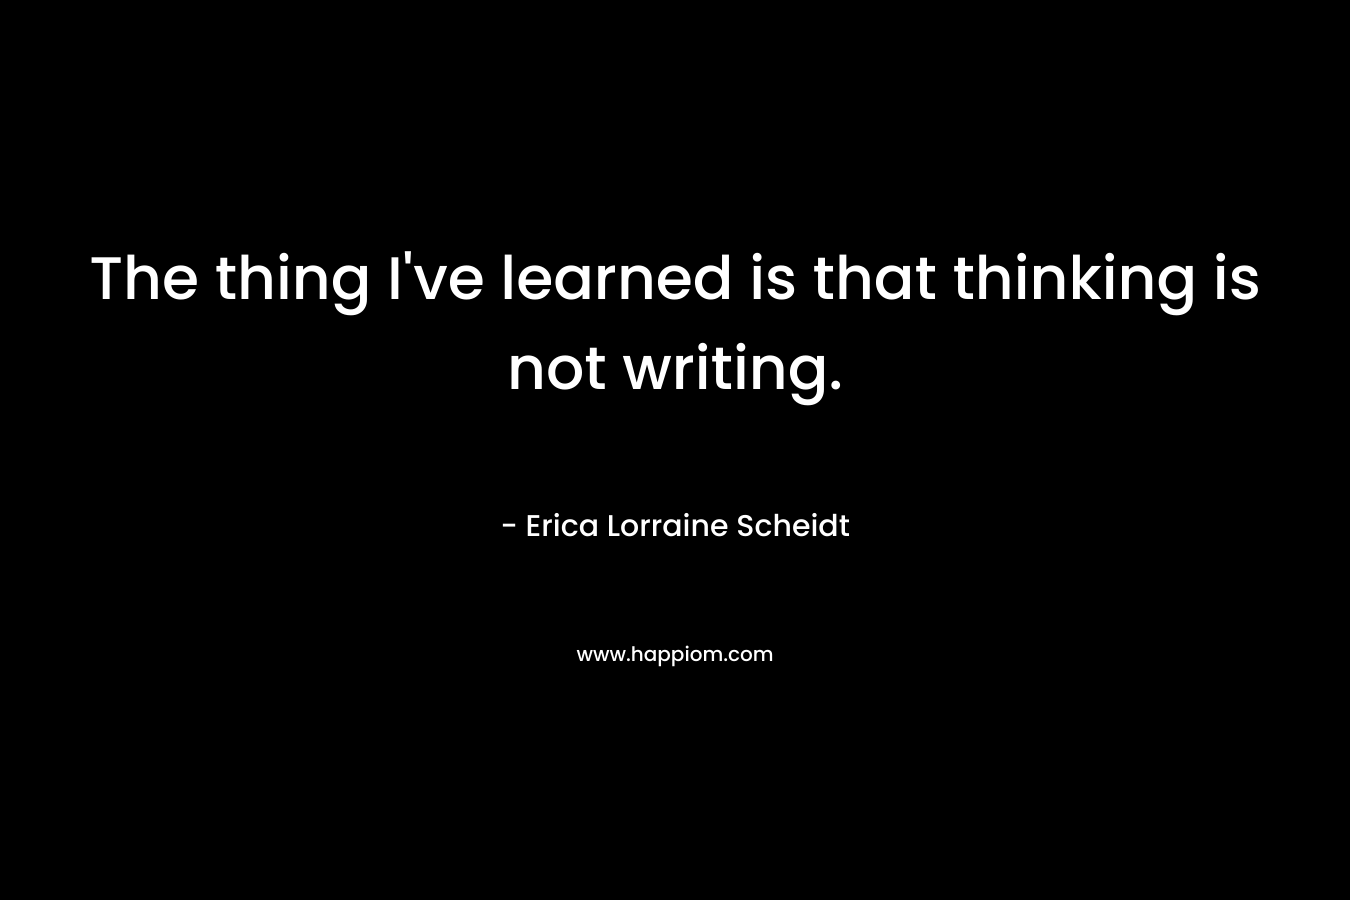 The thing I’ve learned is that thinking is not writing. – Erica Lorraine Scheidt